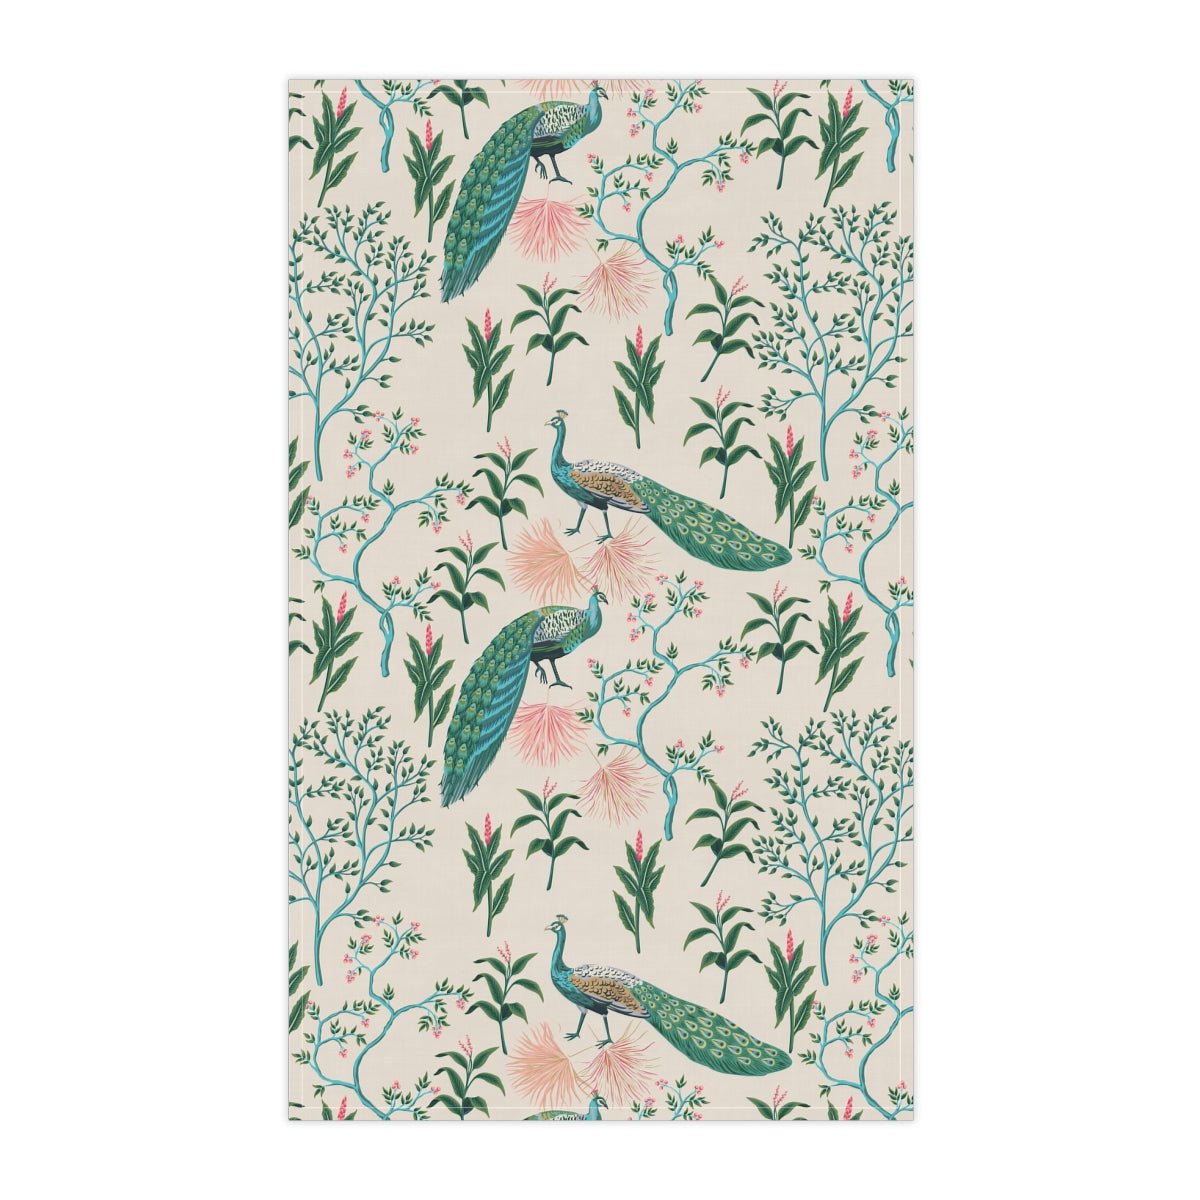 Chinoiserie Peacocks Kitchen Towel - Puffin Lime